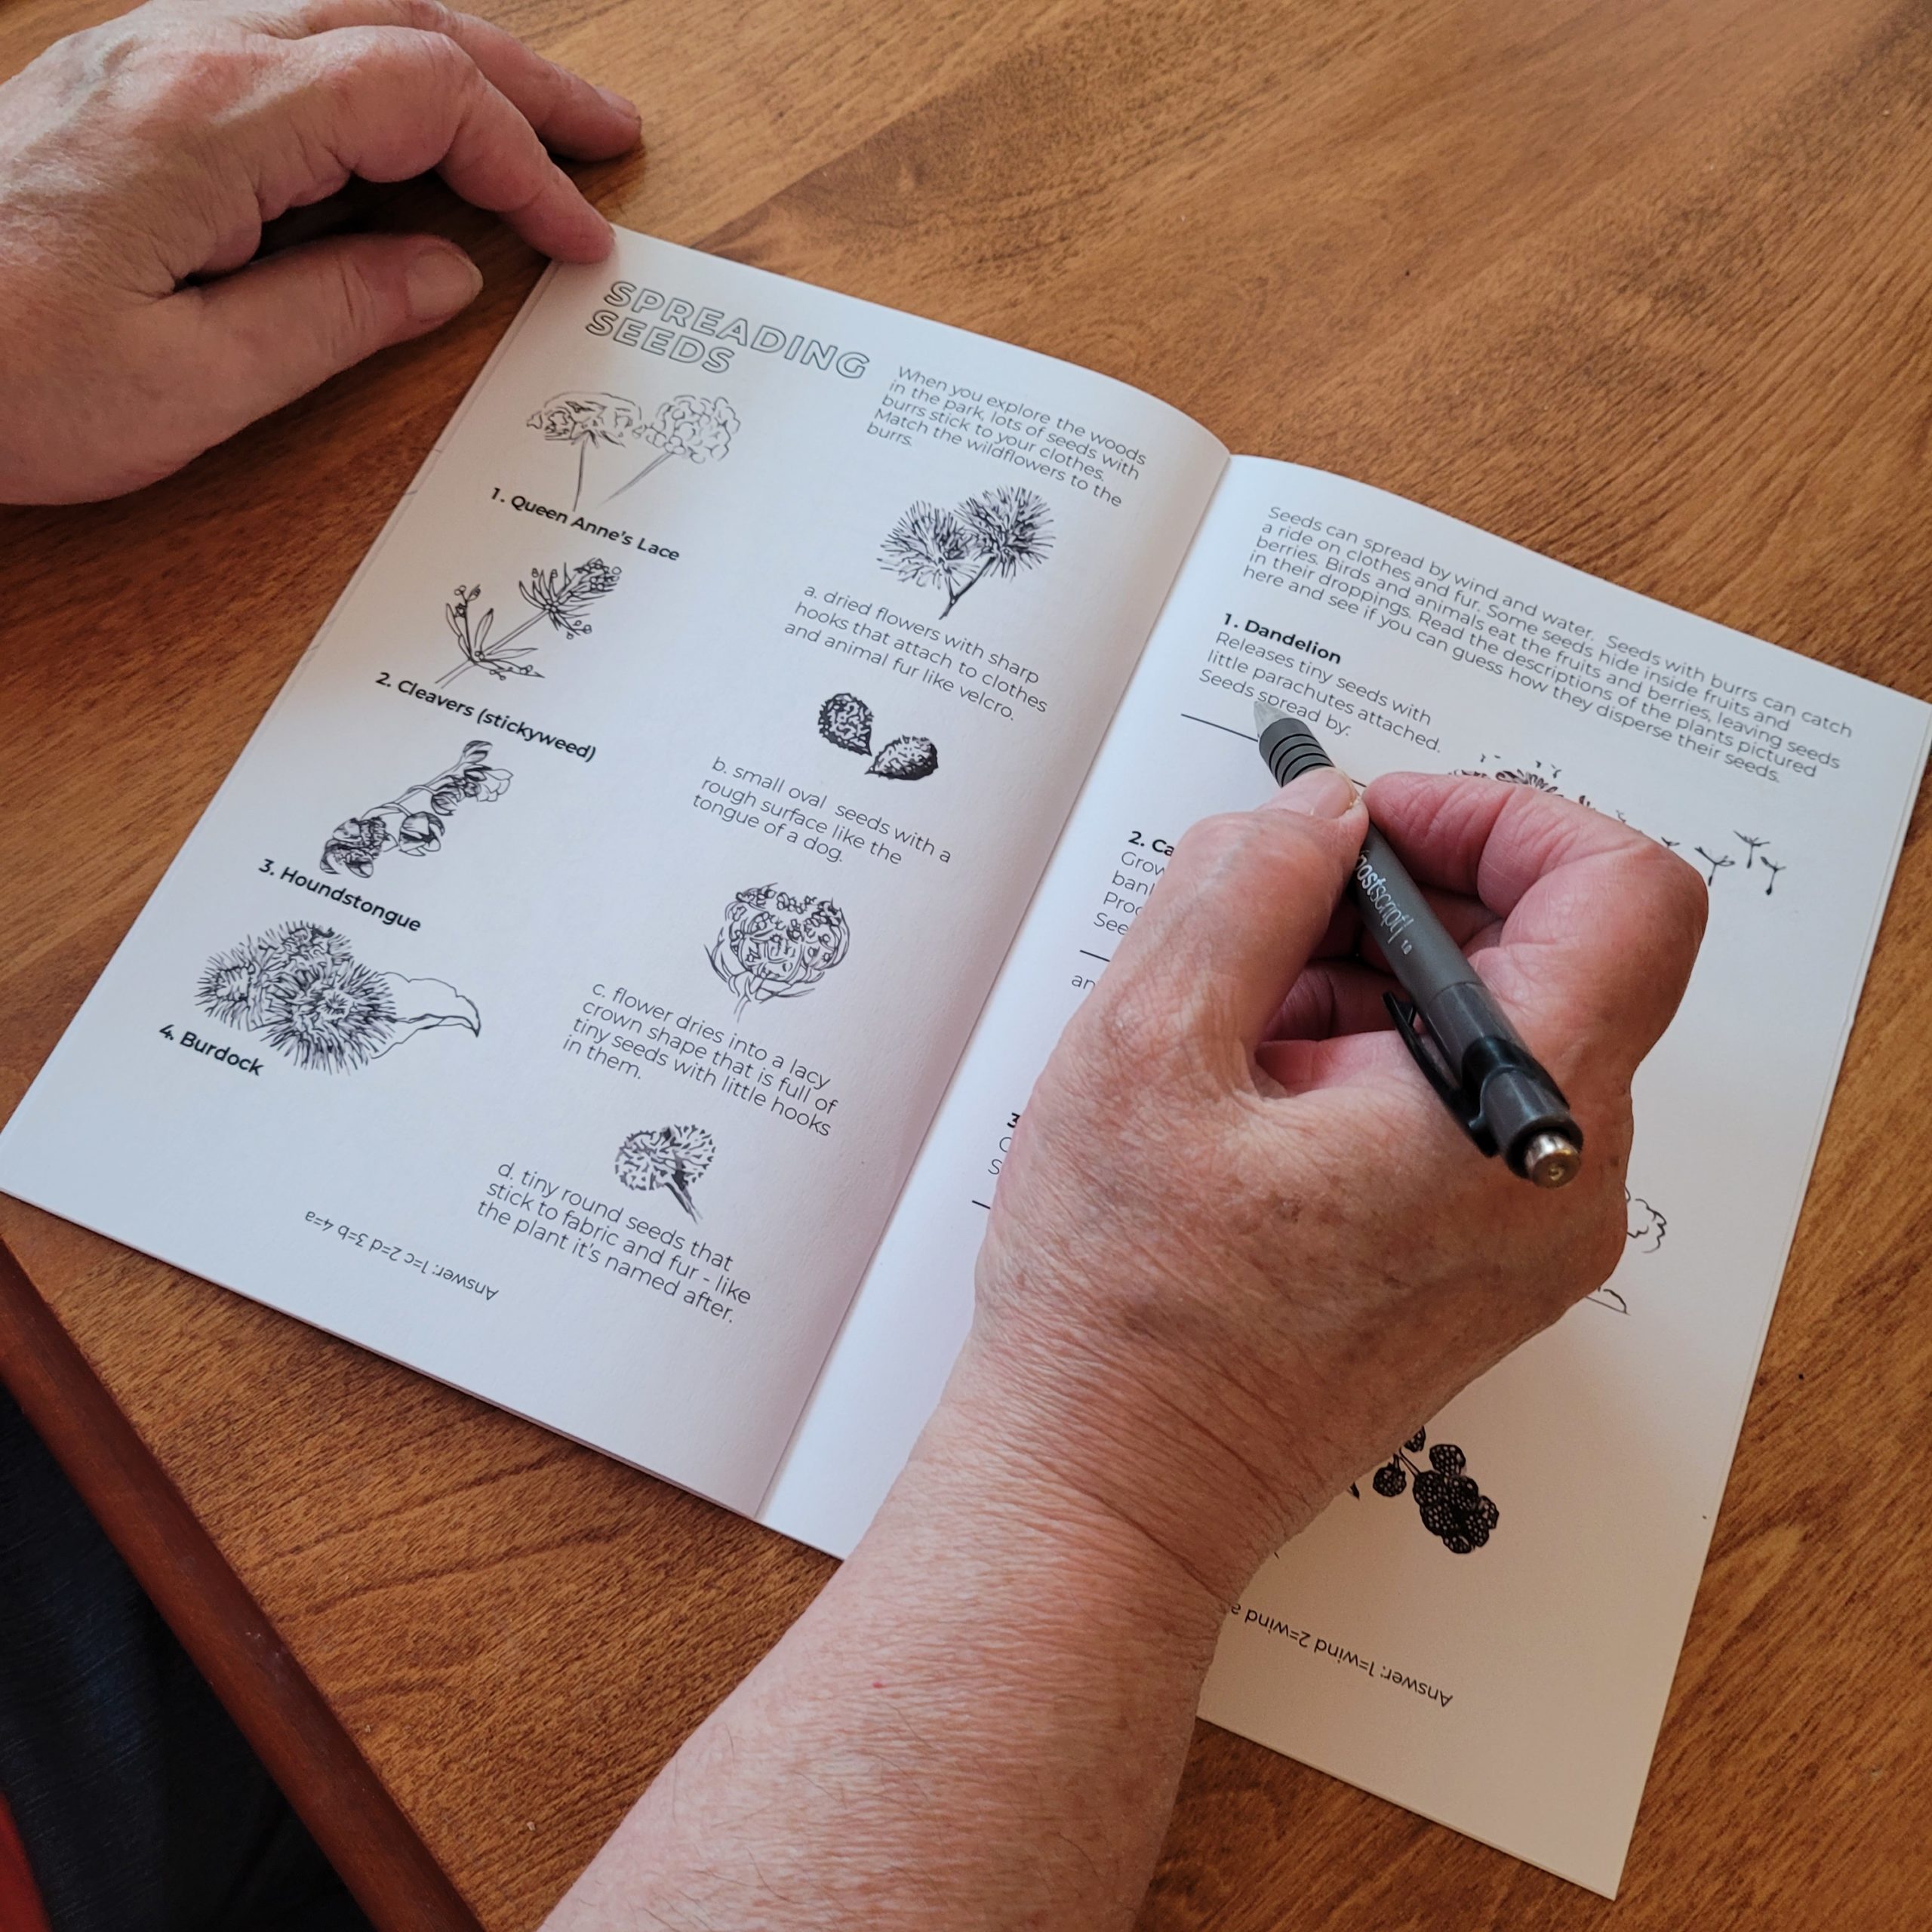 Cropped photo of a person filling out black and white activity book, one holding pen (right) and other is holding book open on wooden table